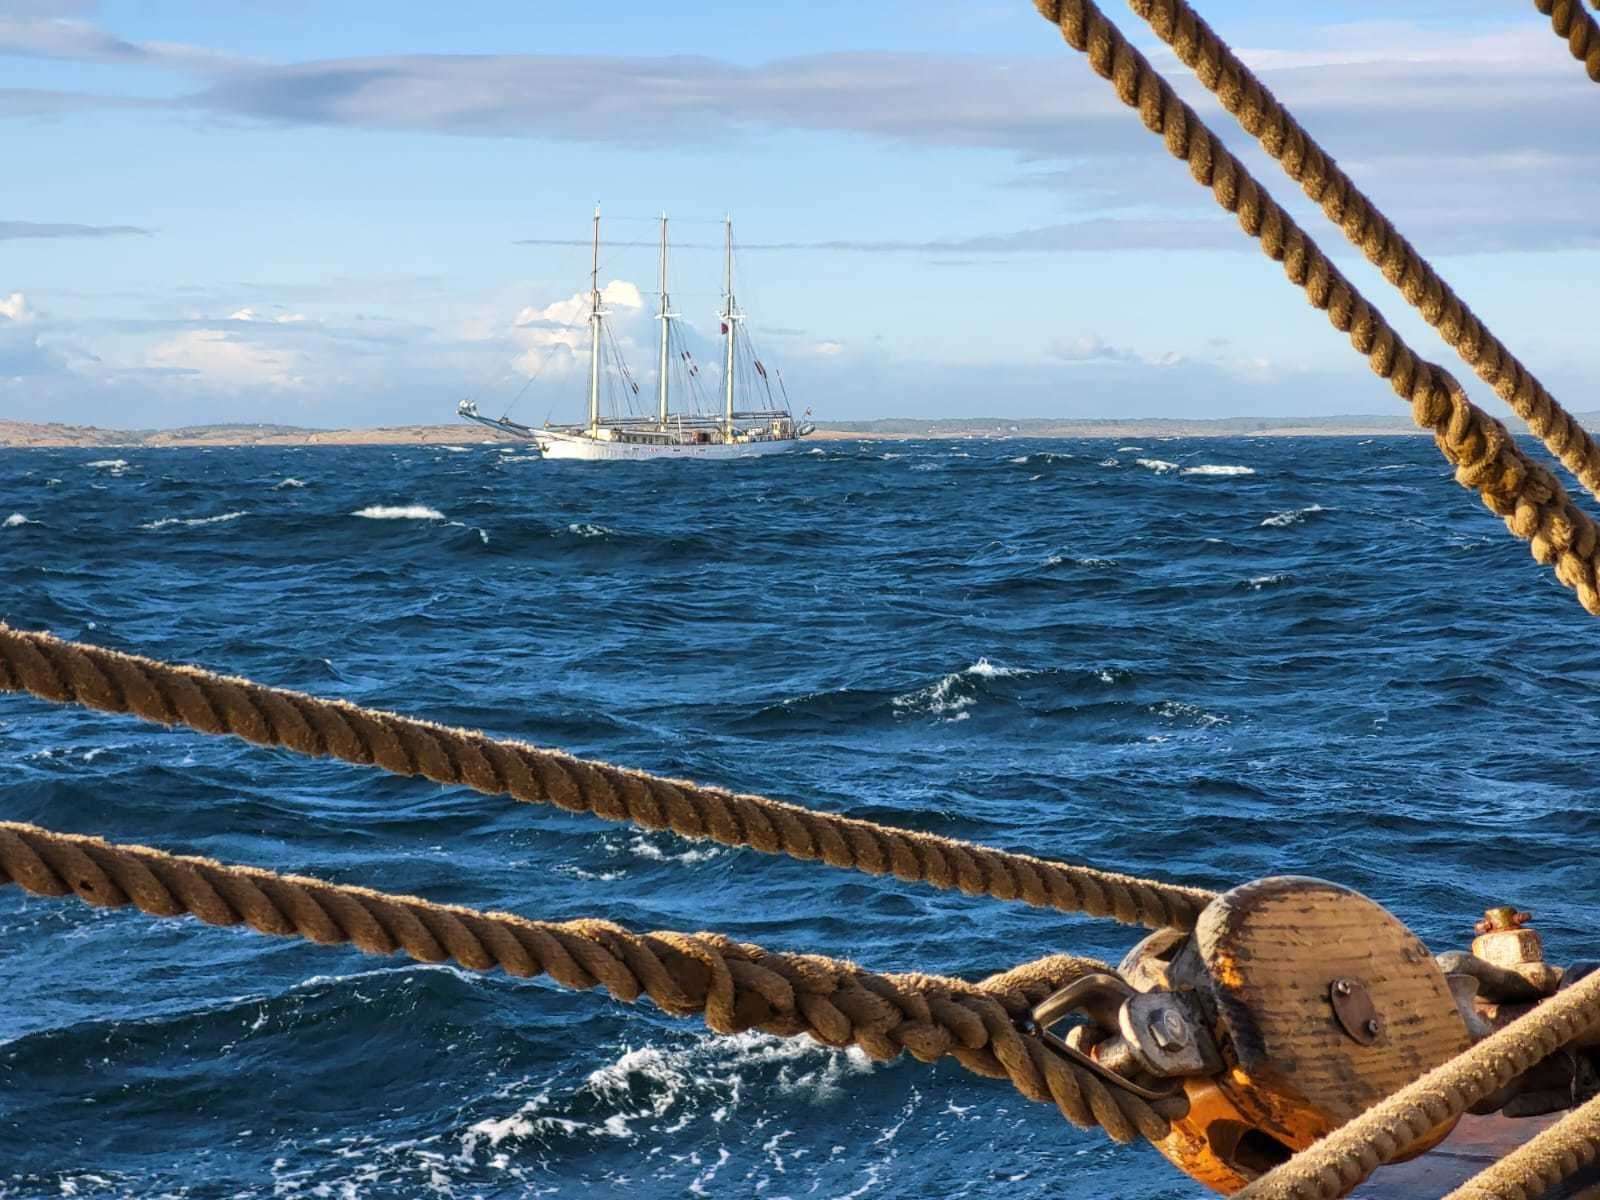 The youngsters from Caithness and Sutherland are on board the Statsraad Lehmkuhl and Roald Amundsen for the Tall Ships Races 2023.